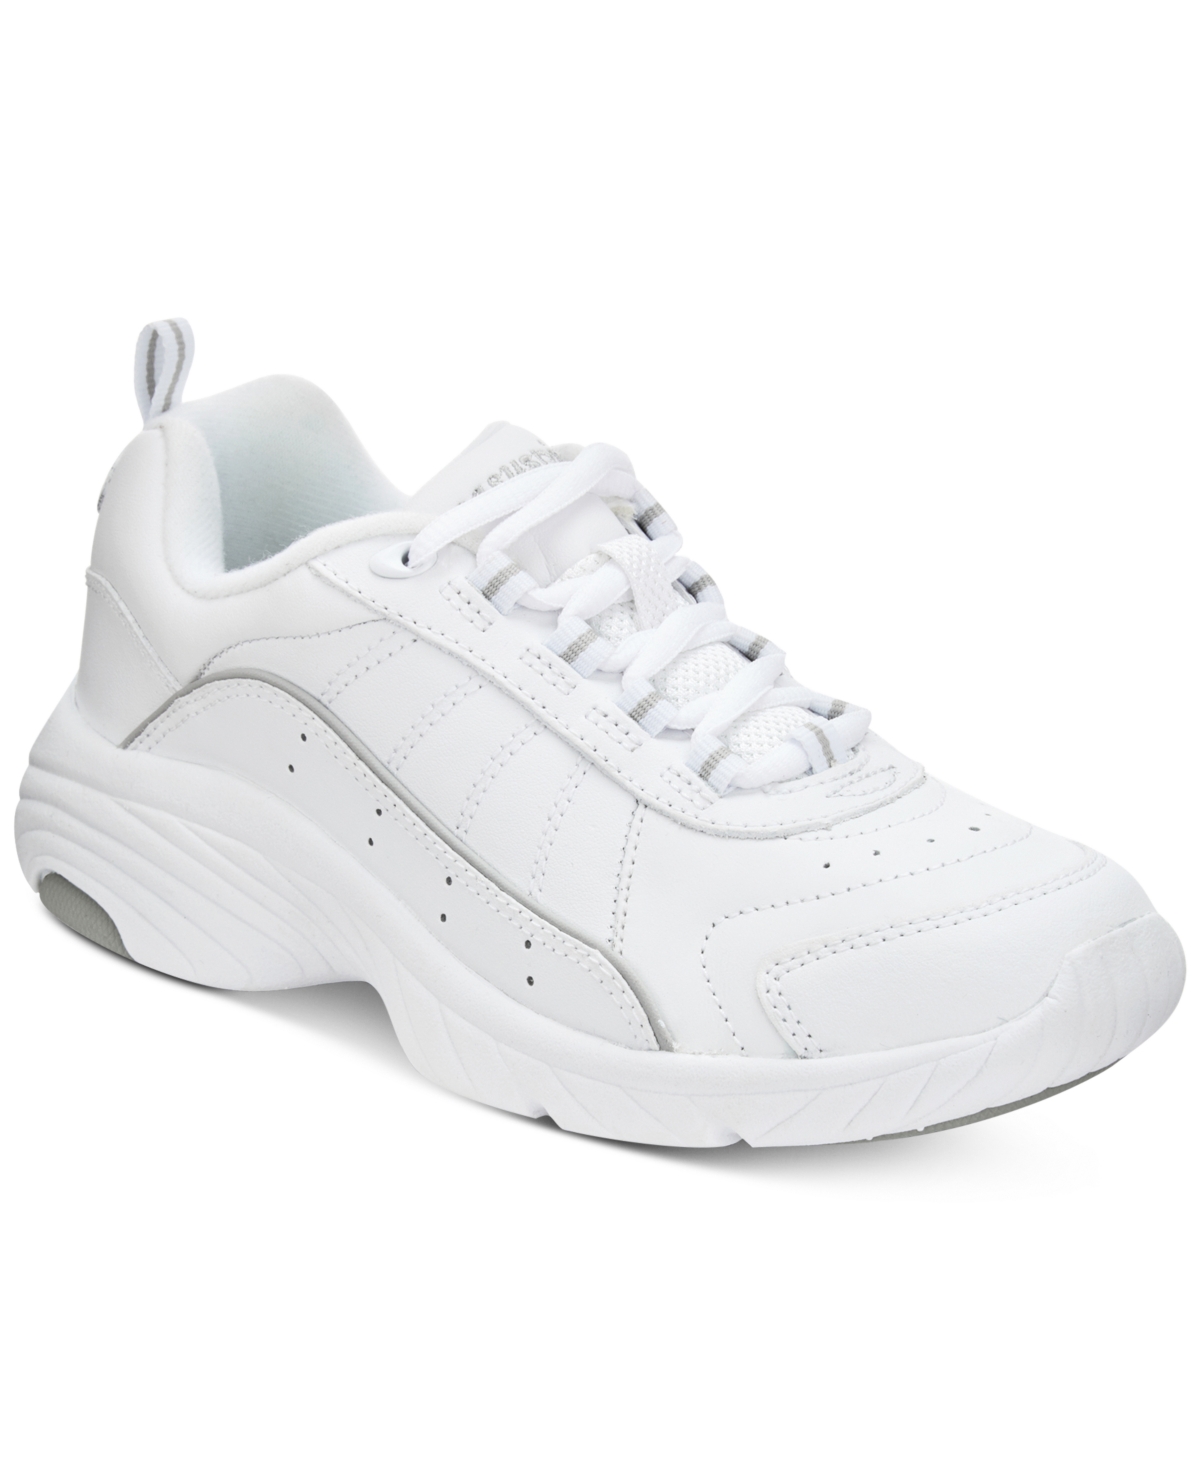 UPC 029005914525 product image for Easy Spirit Punter Sneakers Women's Shoes | upcitemdb.com